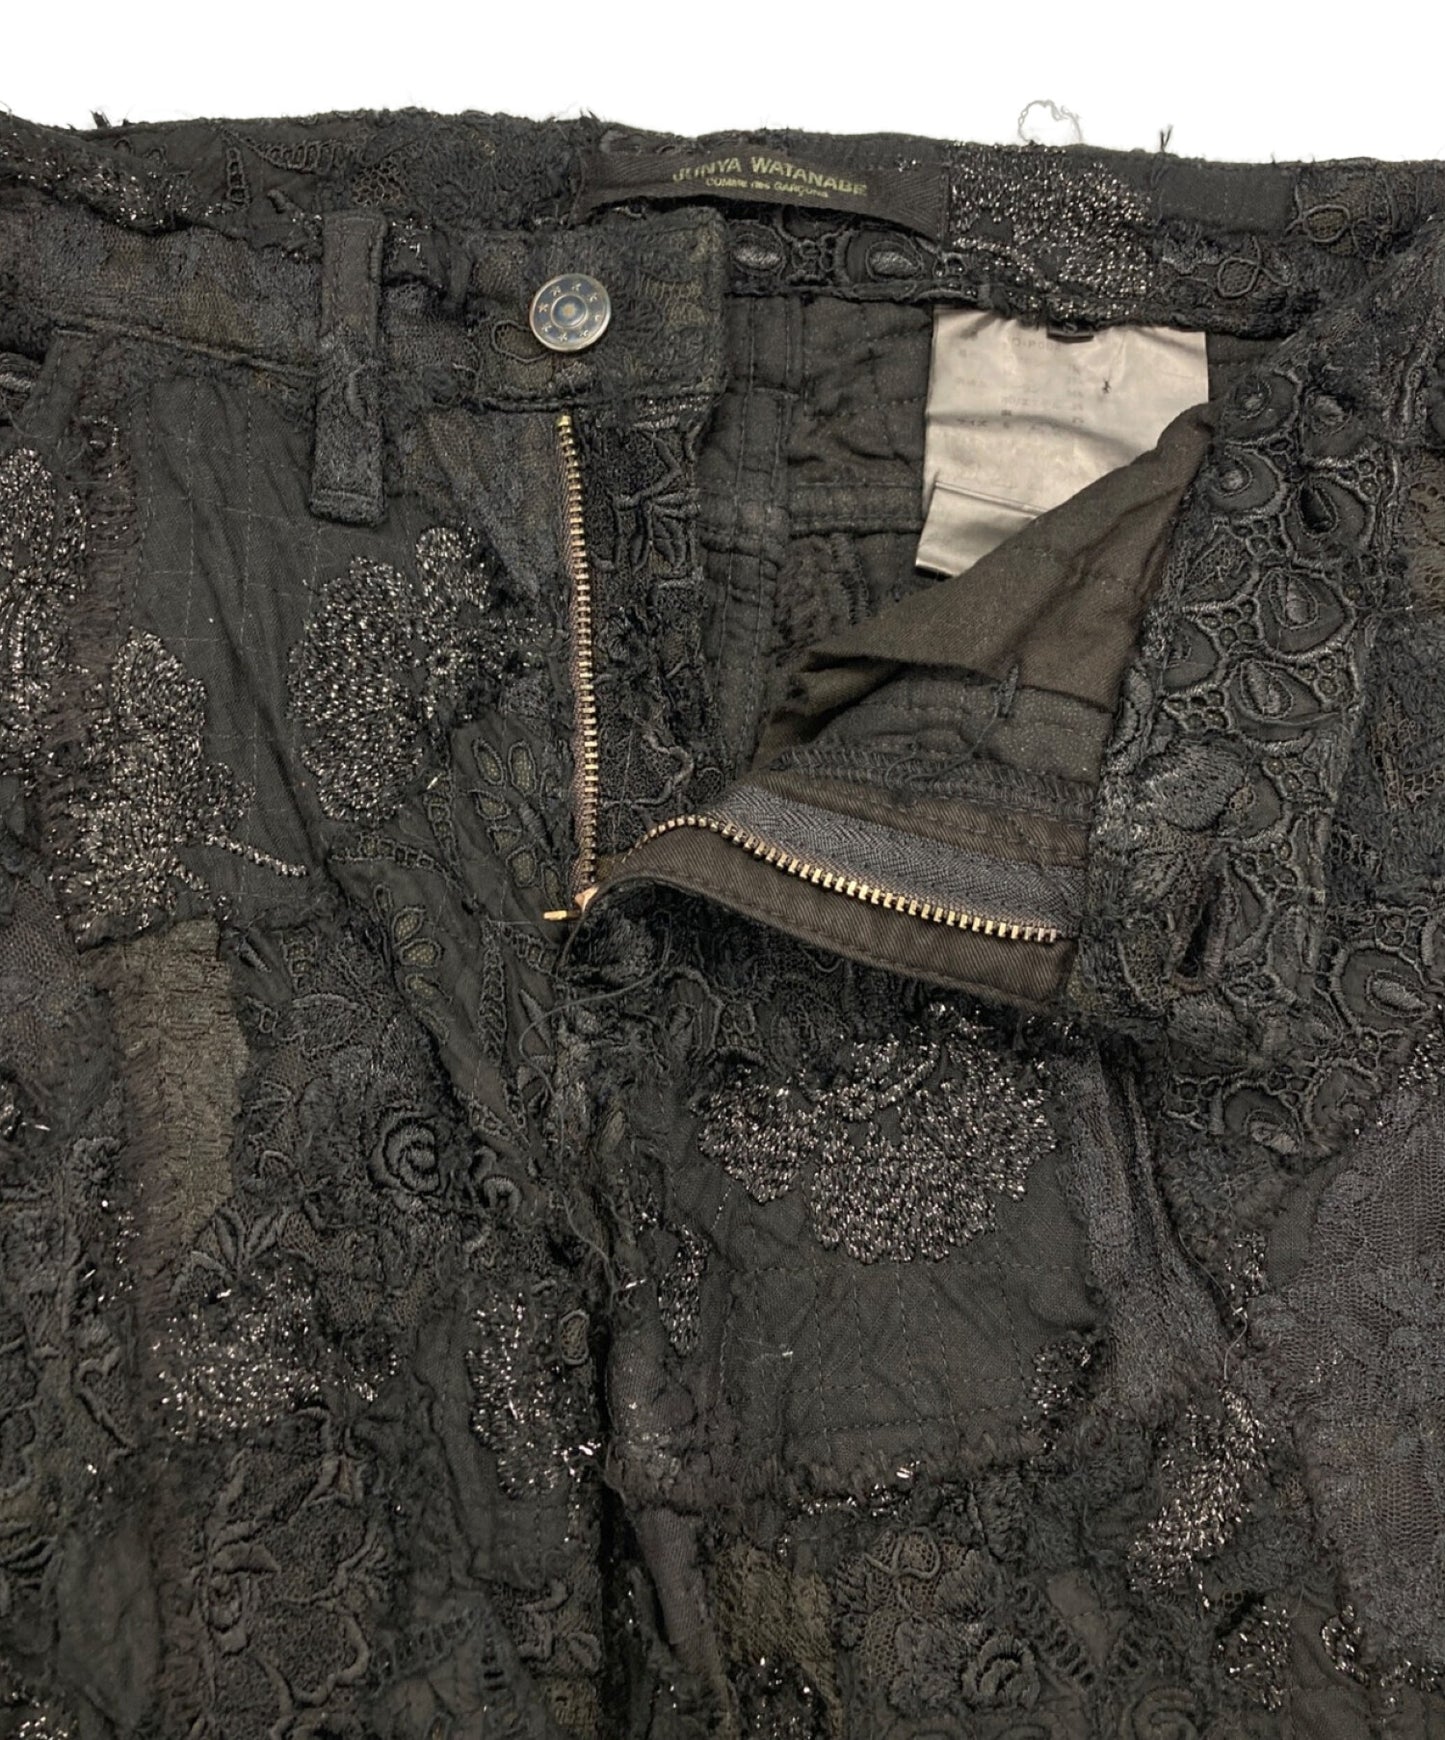 [Pre-owned] JUNYA WATANABE COMME des GARCONS quilted lace pants JO-P004